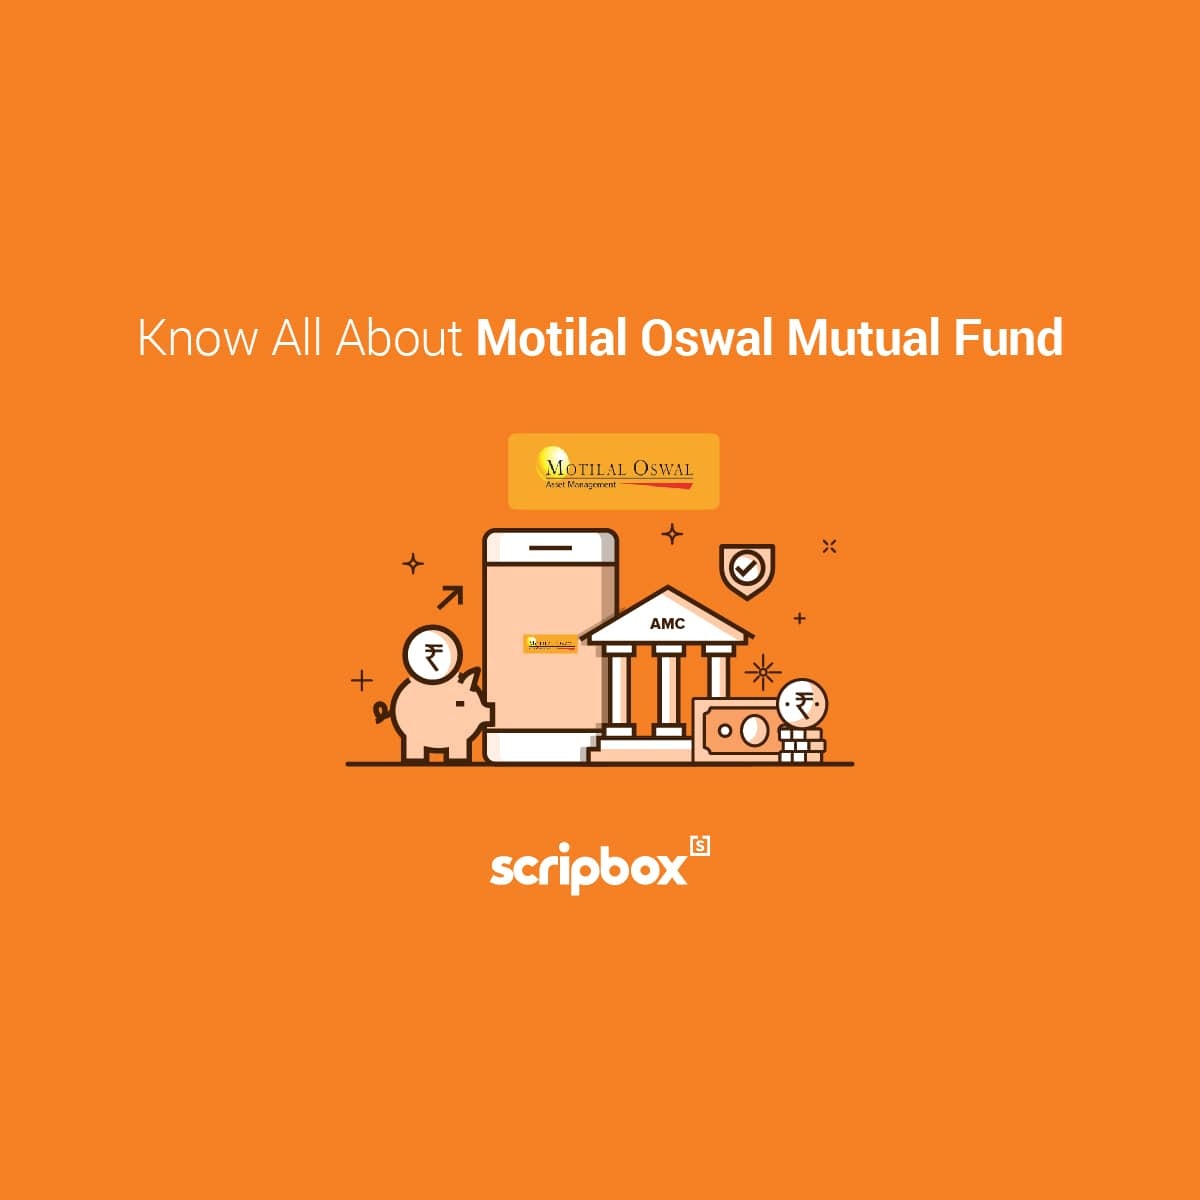 Motilal Oswal AMC Mutual Fund Investment in 2021 Scripbox